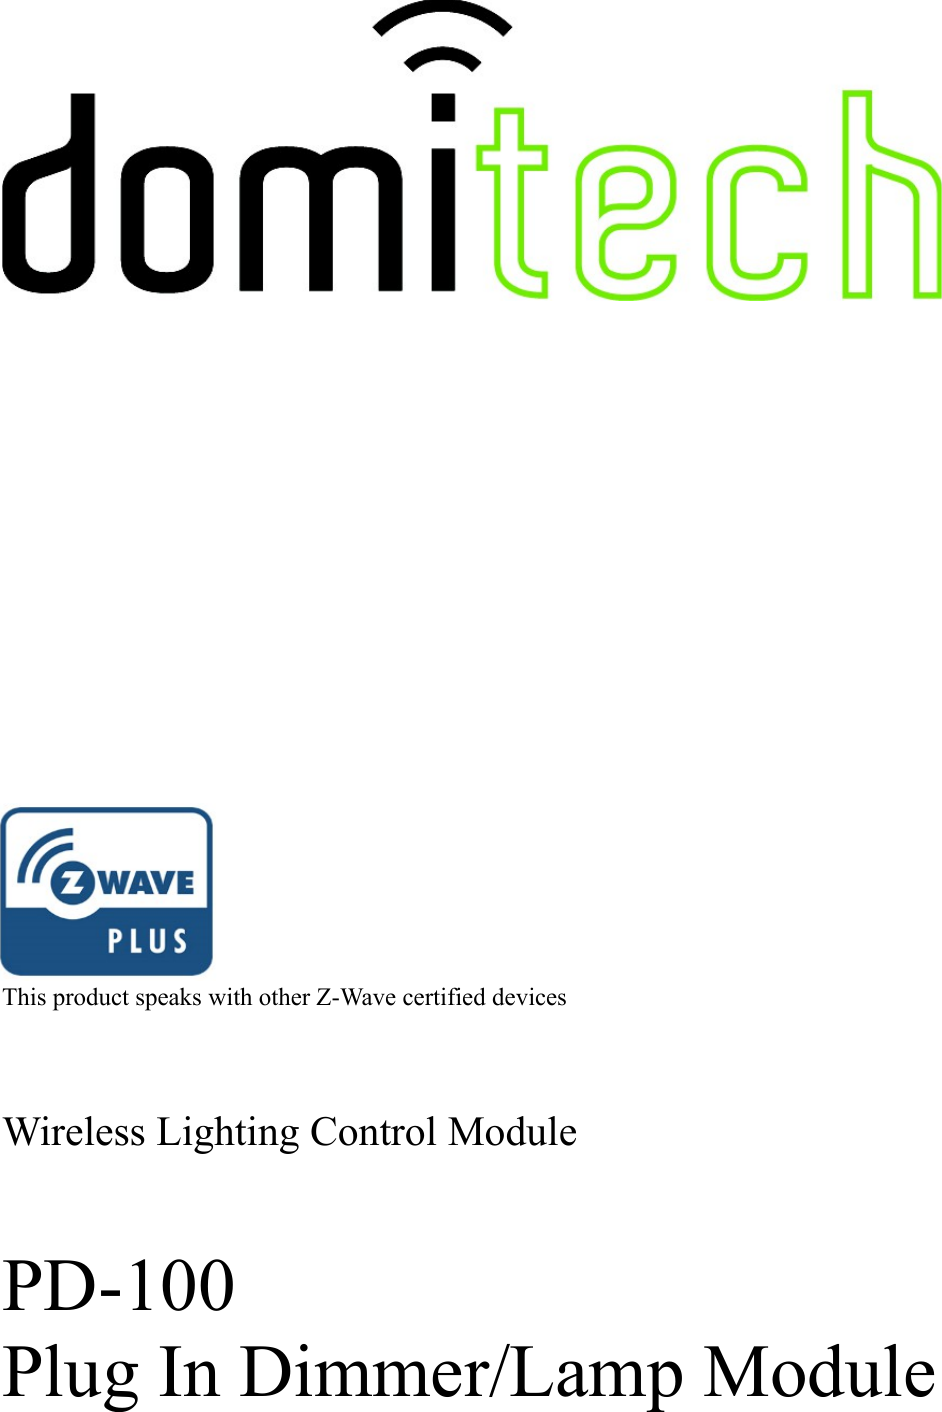                               This product speaks with other Z-Wave certified devicesWireless Lighting Control ModulePD-100Plug In Dimmer/Lamp Module